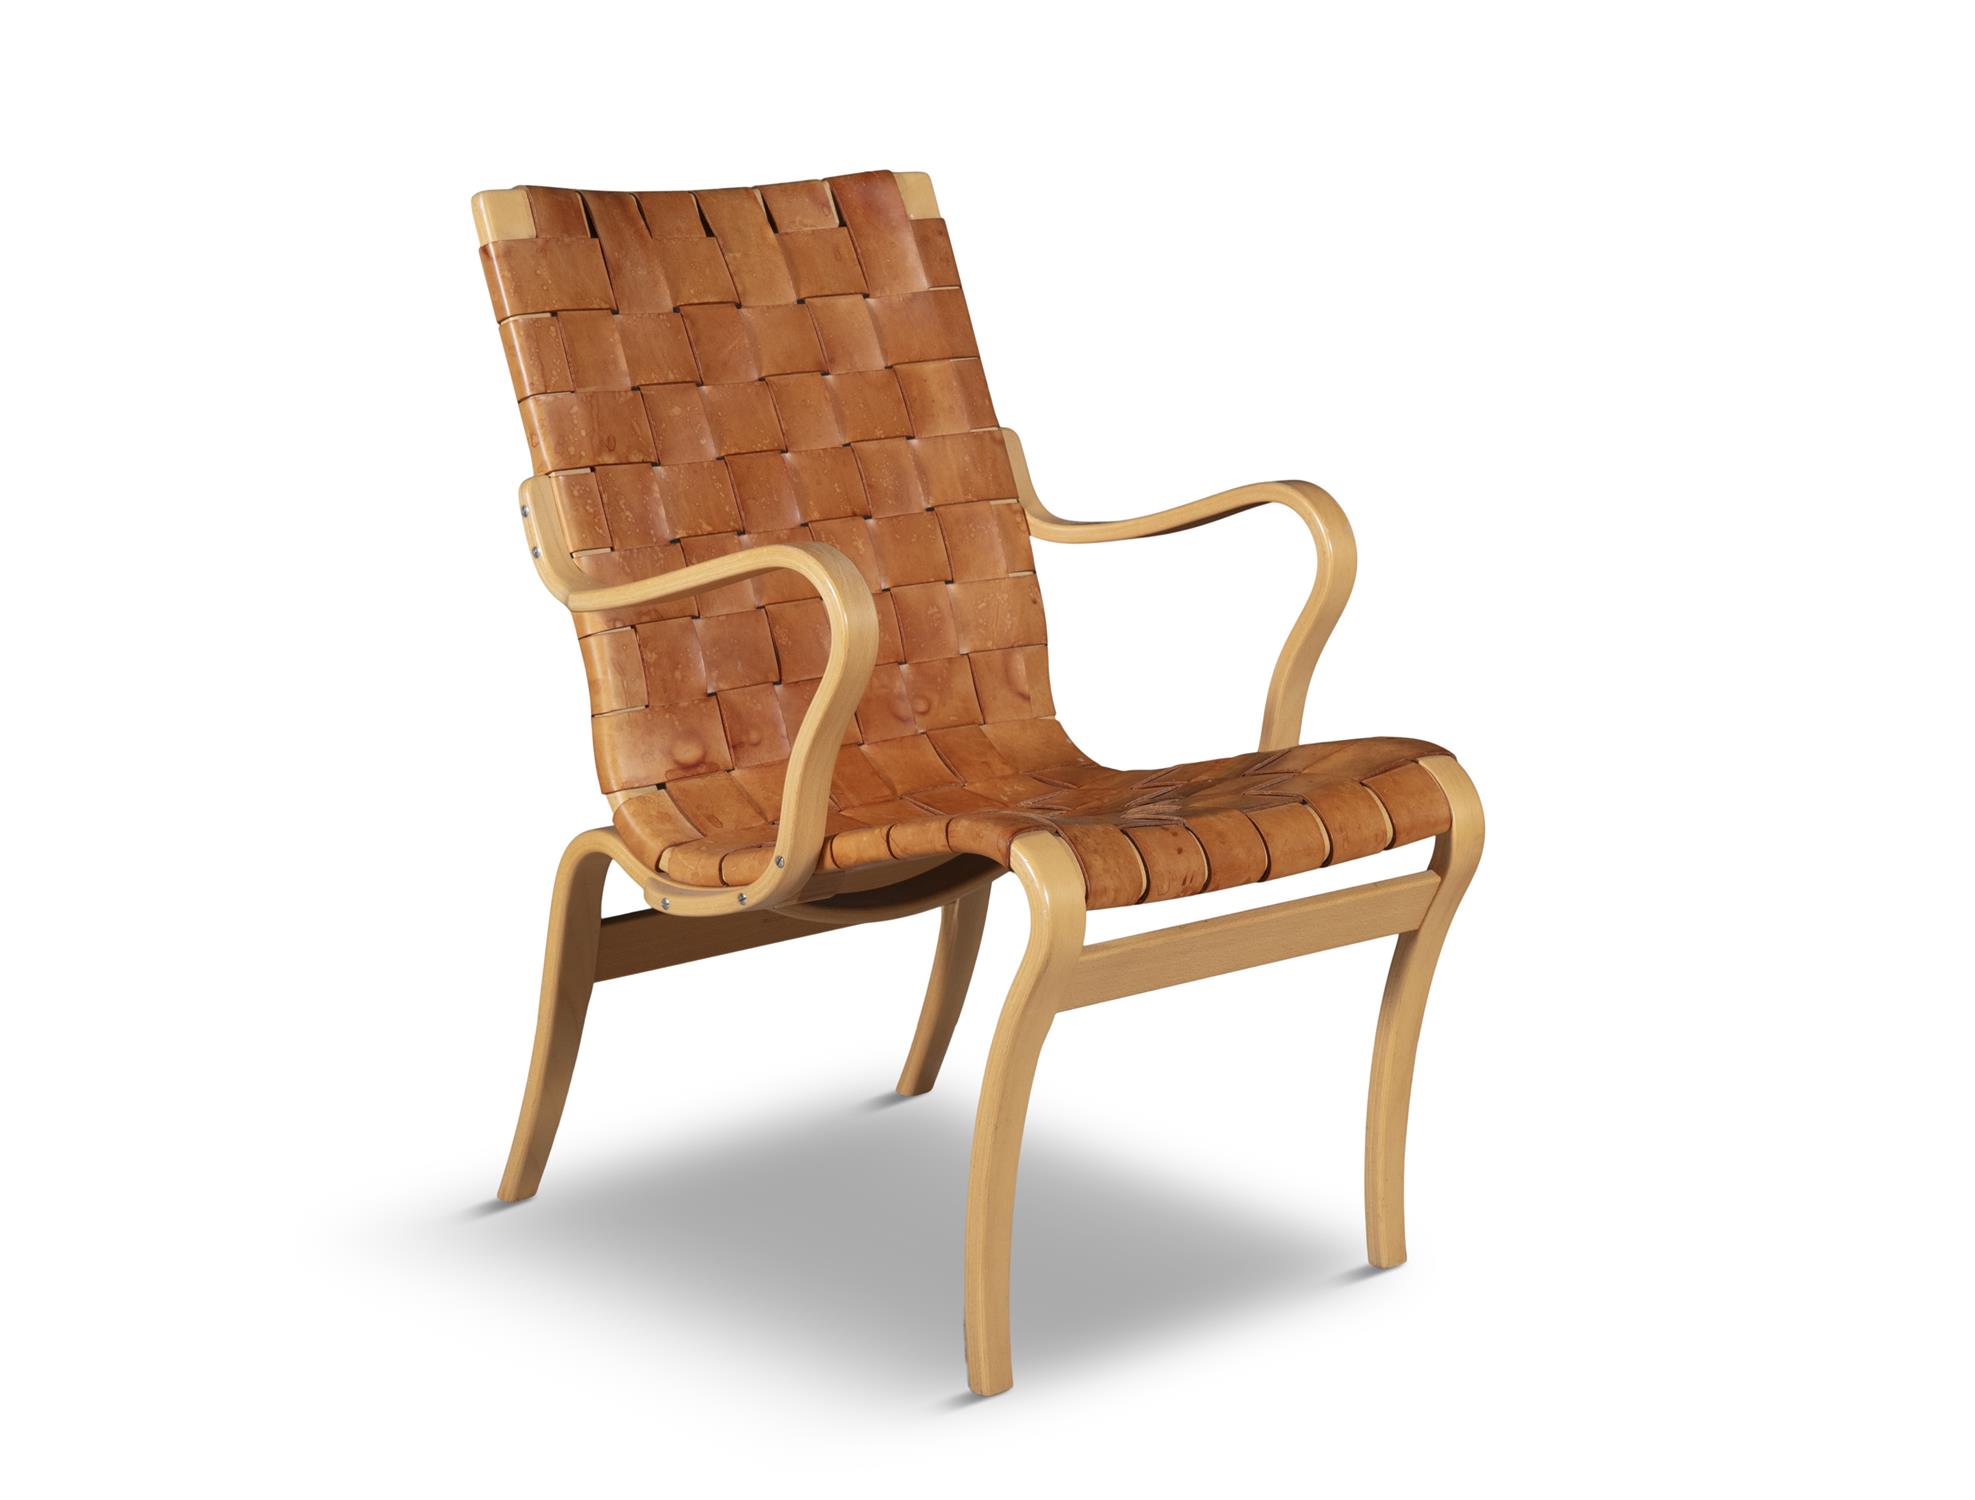 BRUNO MATHSSON Eva armchair by Bruno Mathsson in beech and leather. c.1970. 60 x 65 x 80cm(h);